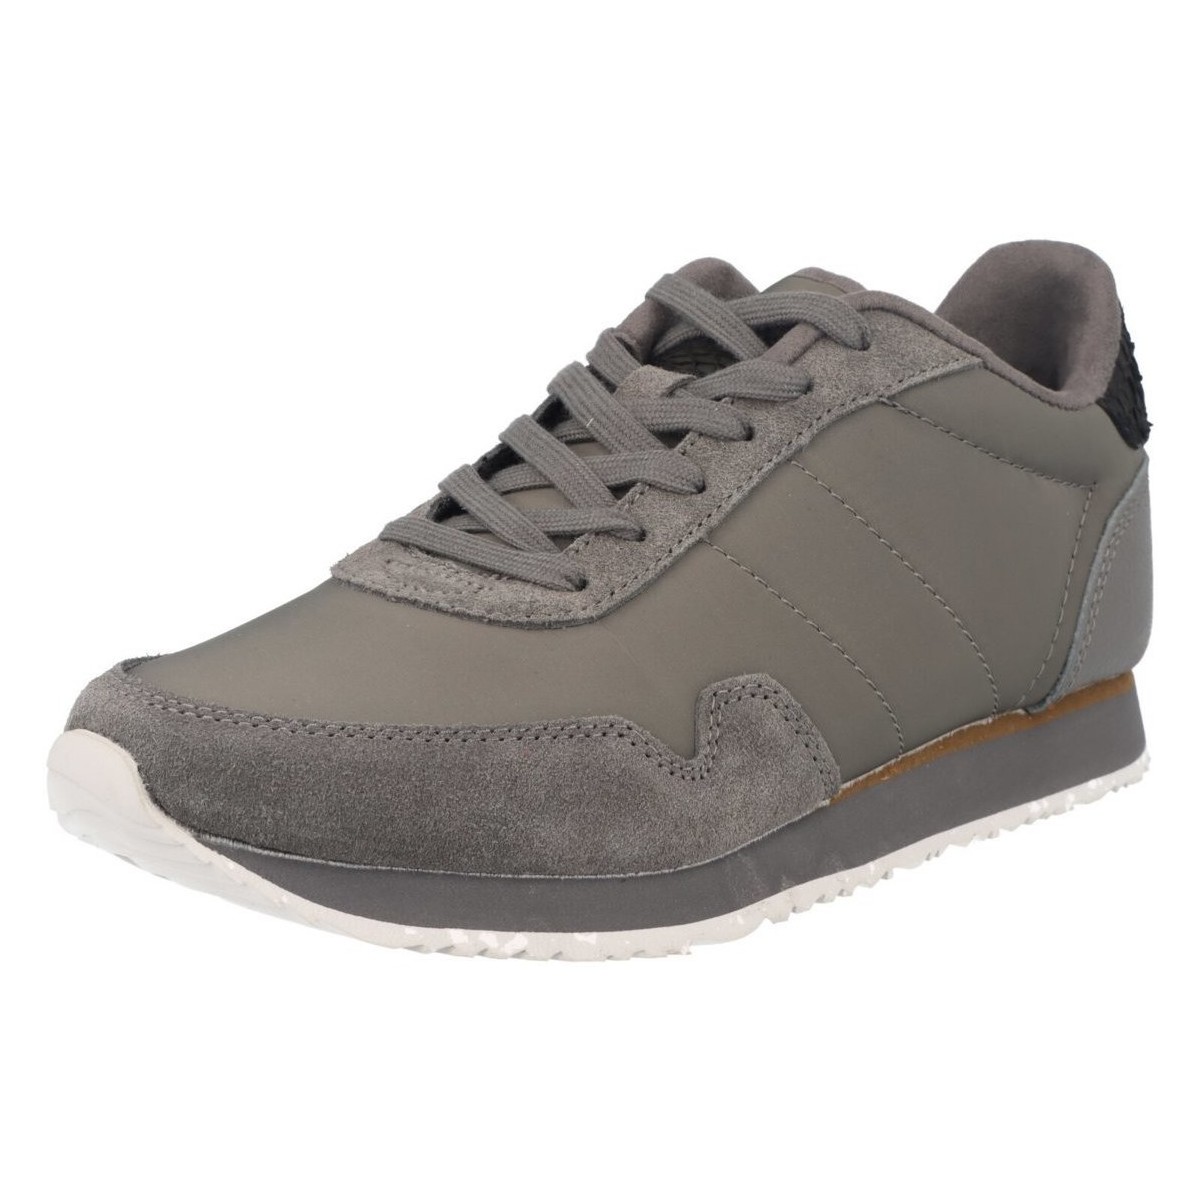 Chaussures Femme Hoka one one  Gris